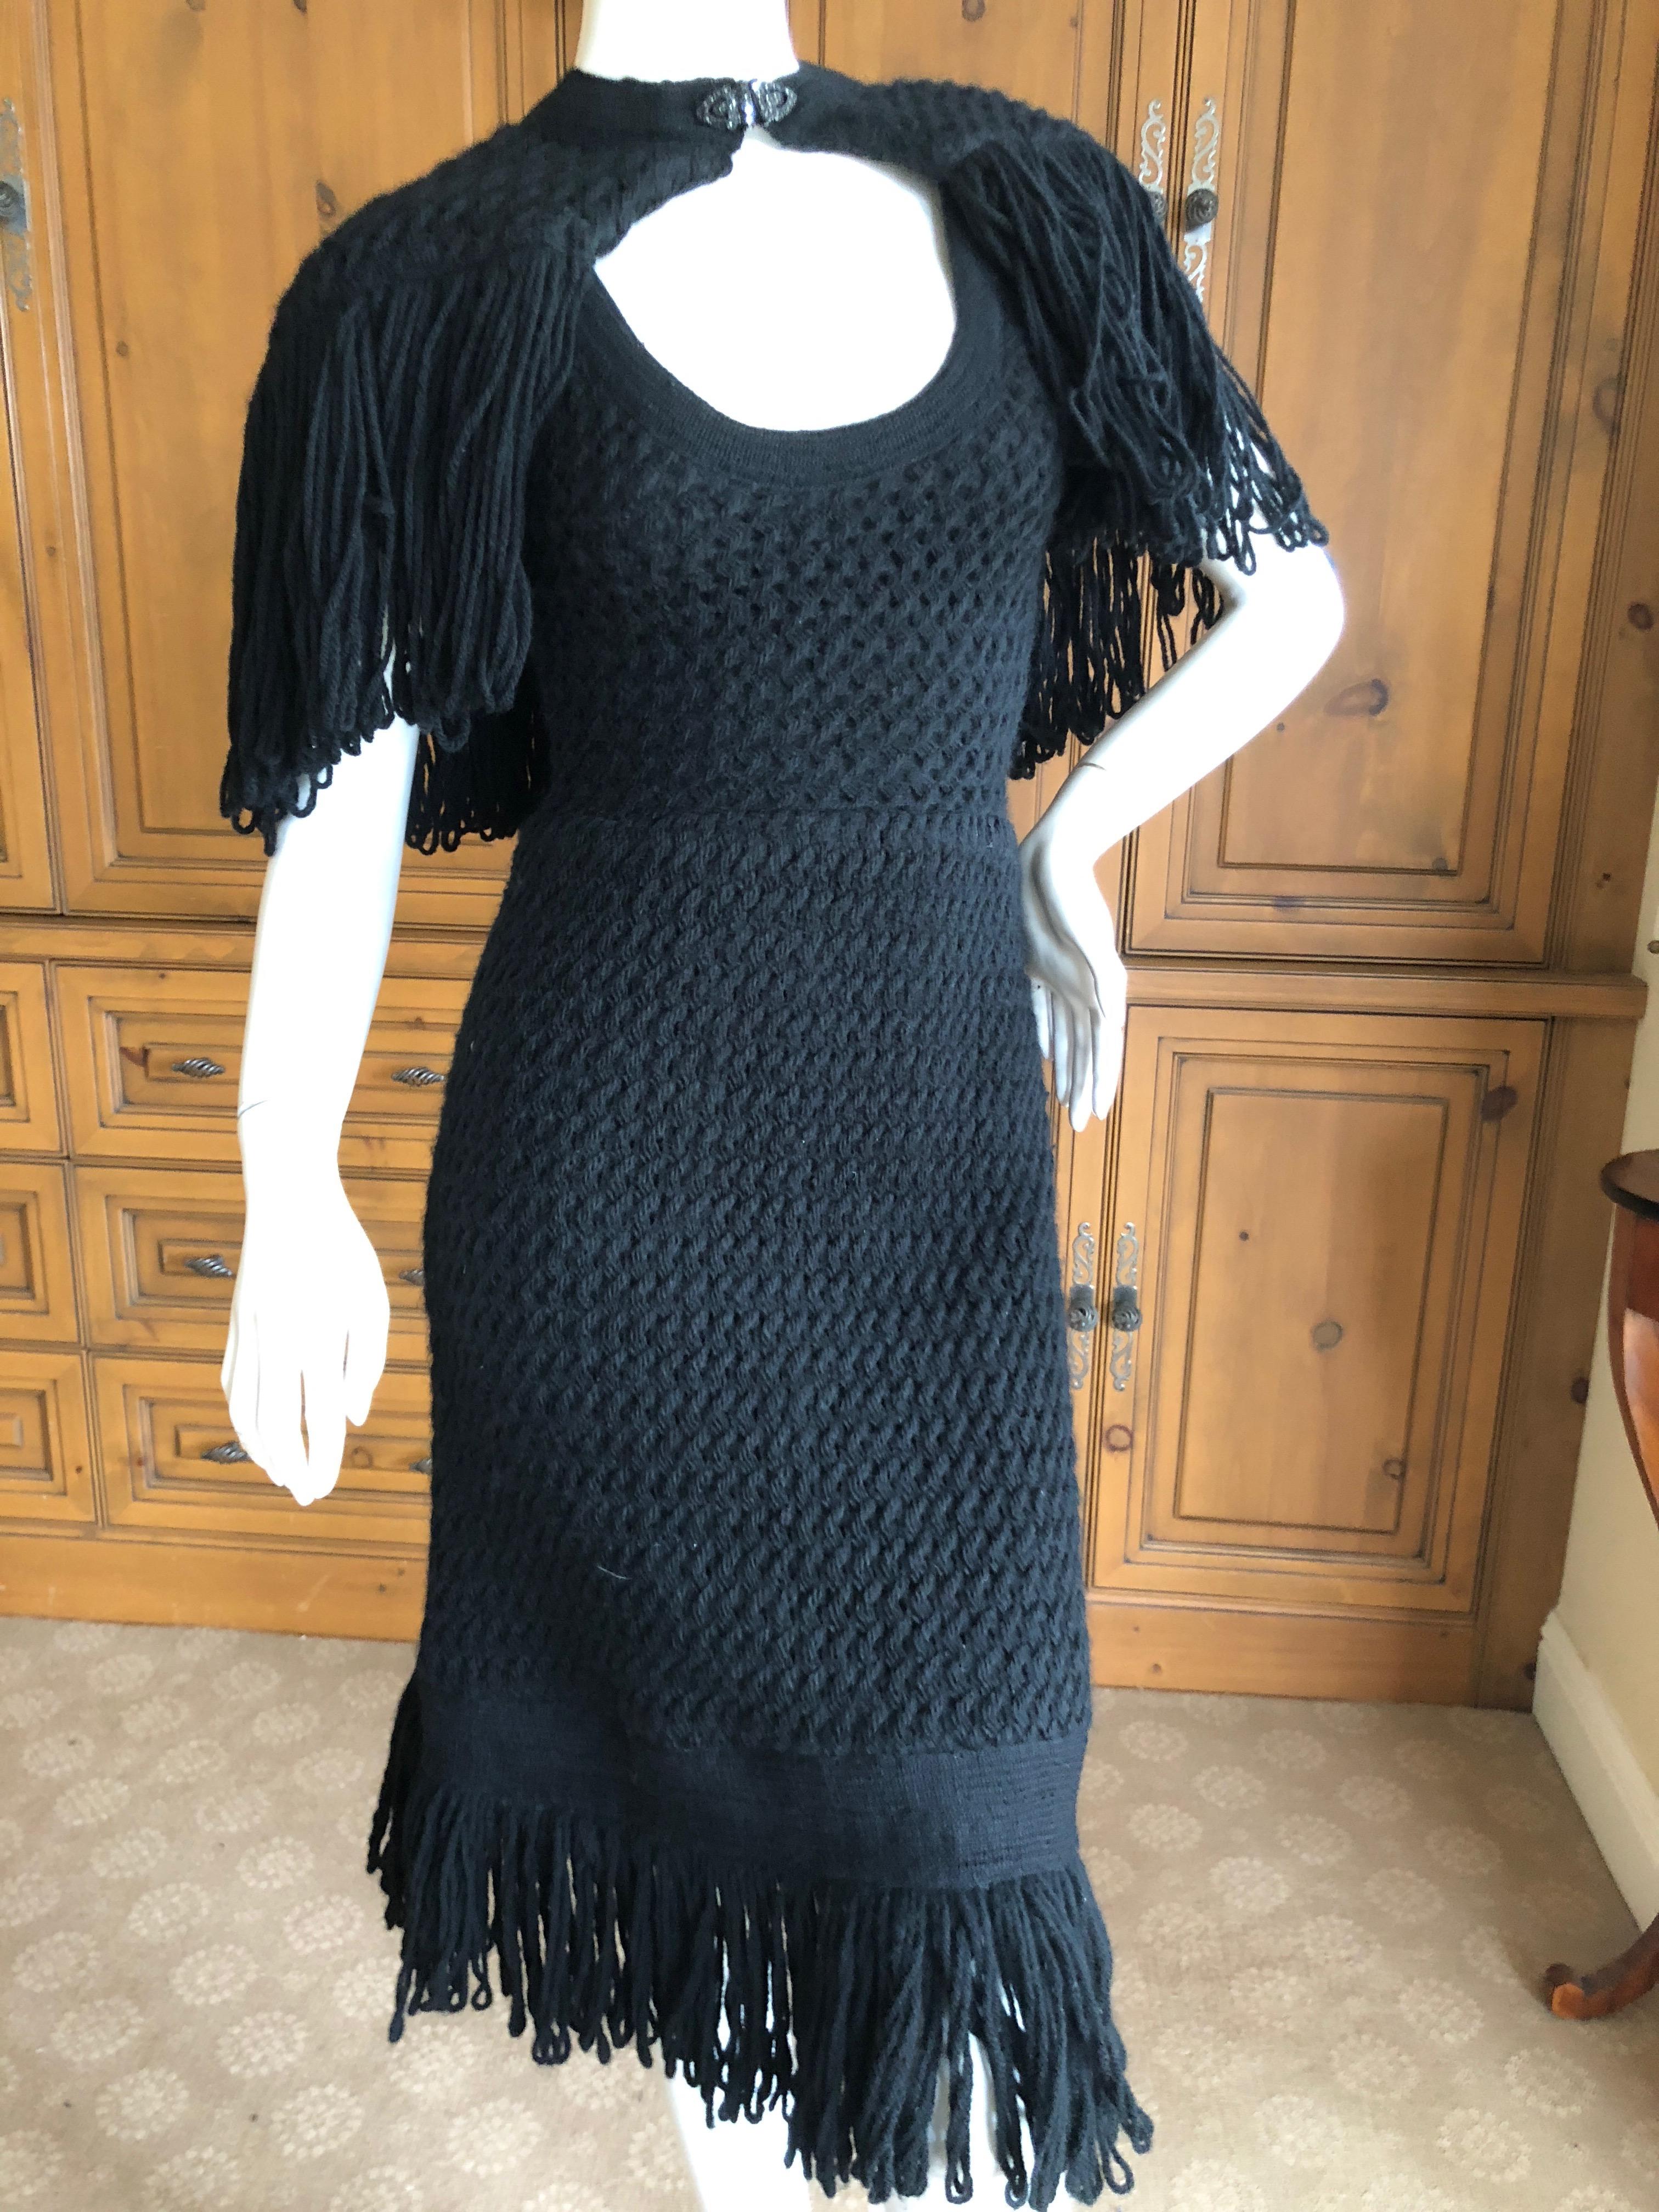 Cardinali Black Silk Lined Crochet Dress with Matching Fringed Shawl Fall 1971  For Sale 7